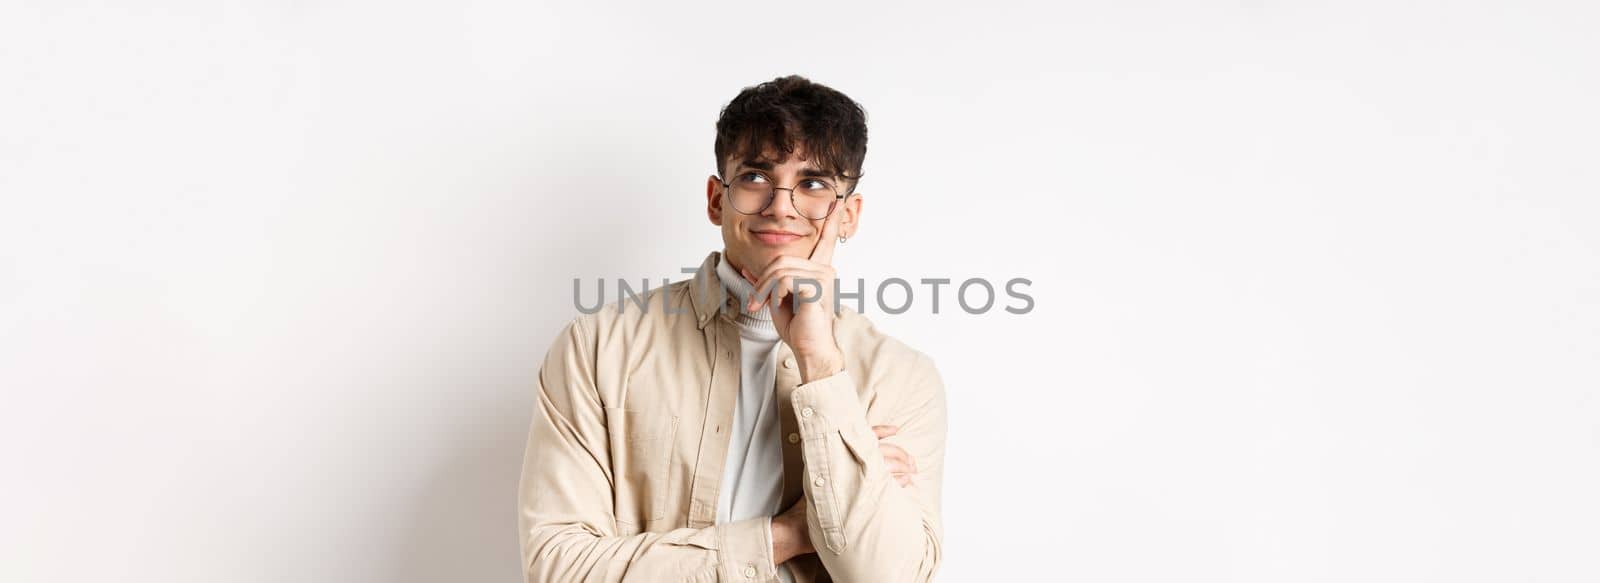 Image of happy dreamy young man imaging something good, smiling and looking at upper right corner thoughtful, standing on white background.